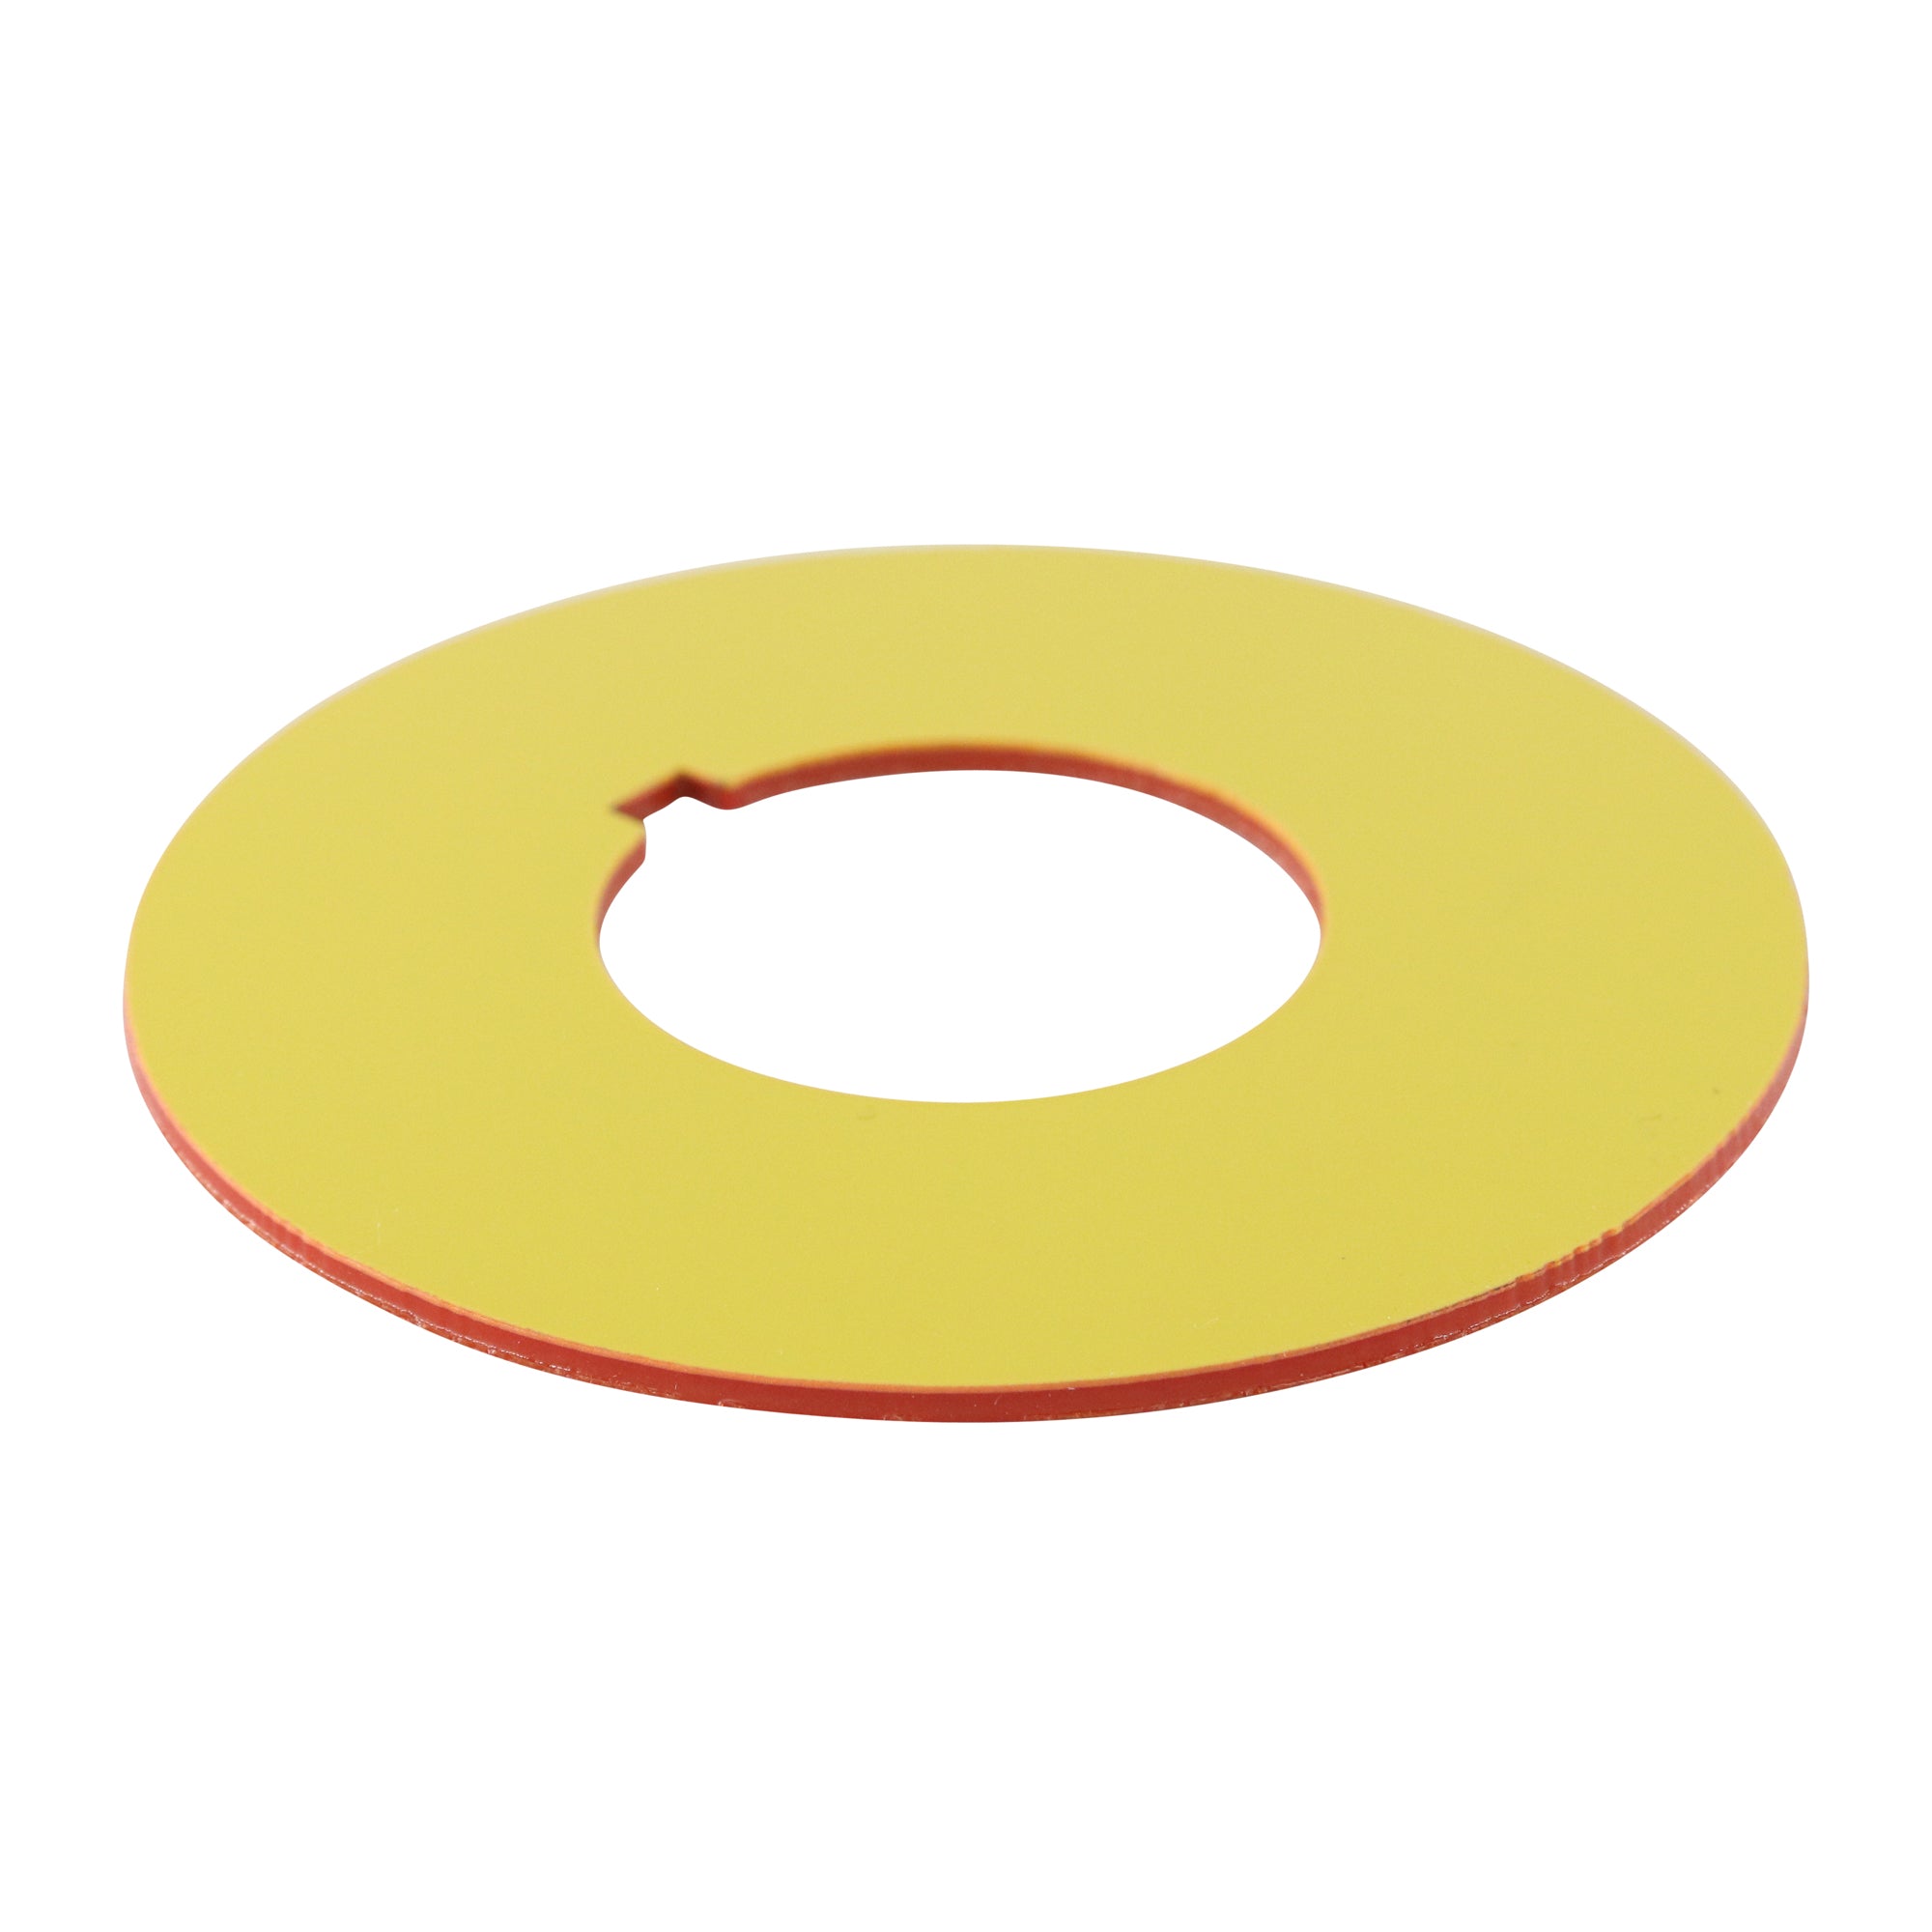 EATON, EATON 10250TRP76 PLASTIC ROUND LEGEND PLATE PUSH-BUTTONS, RED/YELLOW, 70MM